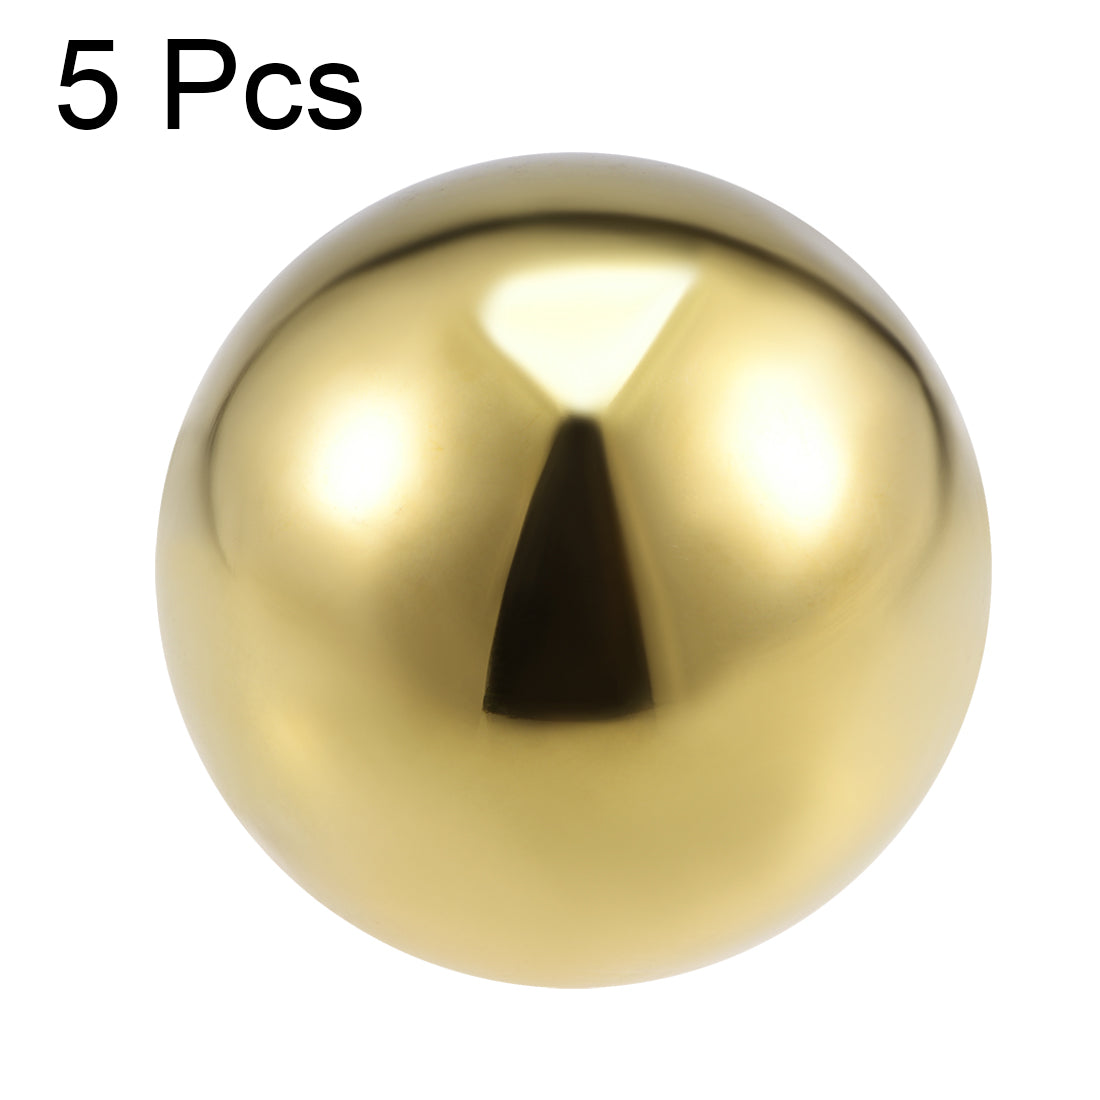 uxcell Uxcell 60mm Dia 201 Stainless Steel Hollow Cap Ball Spheres for Handrail Stair Newel Post Gold Tone 5pcs